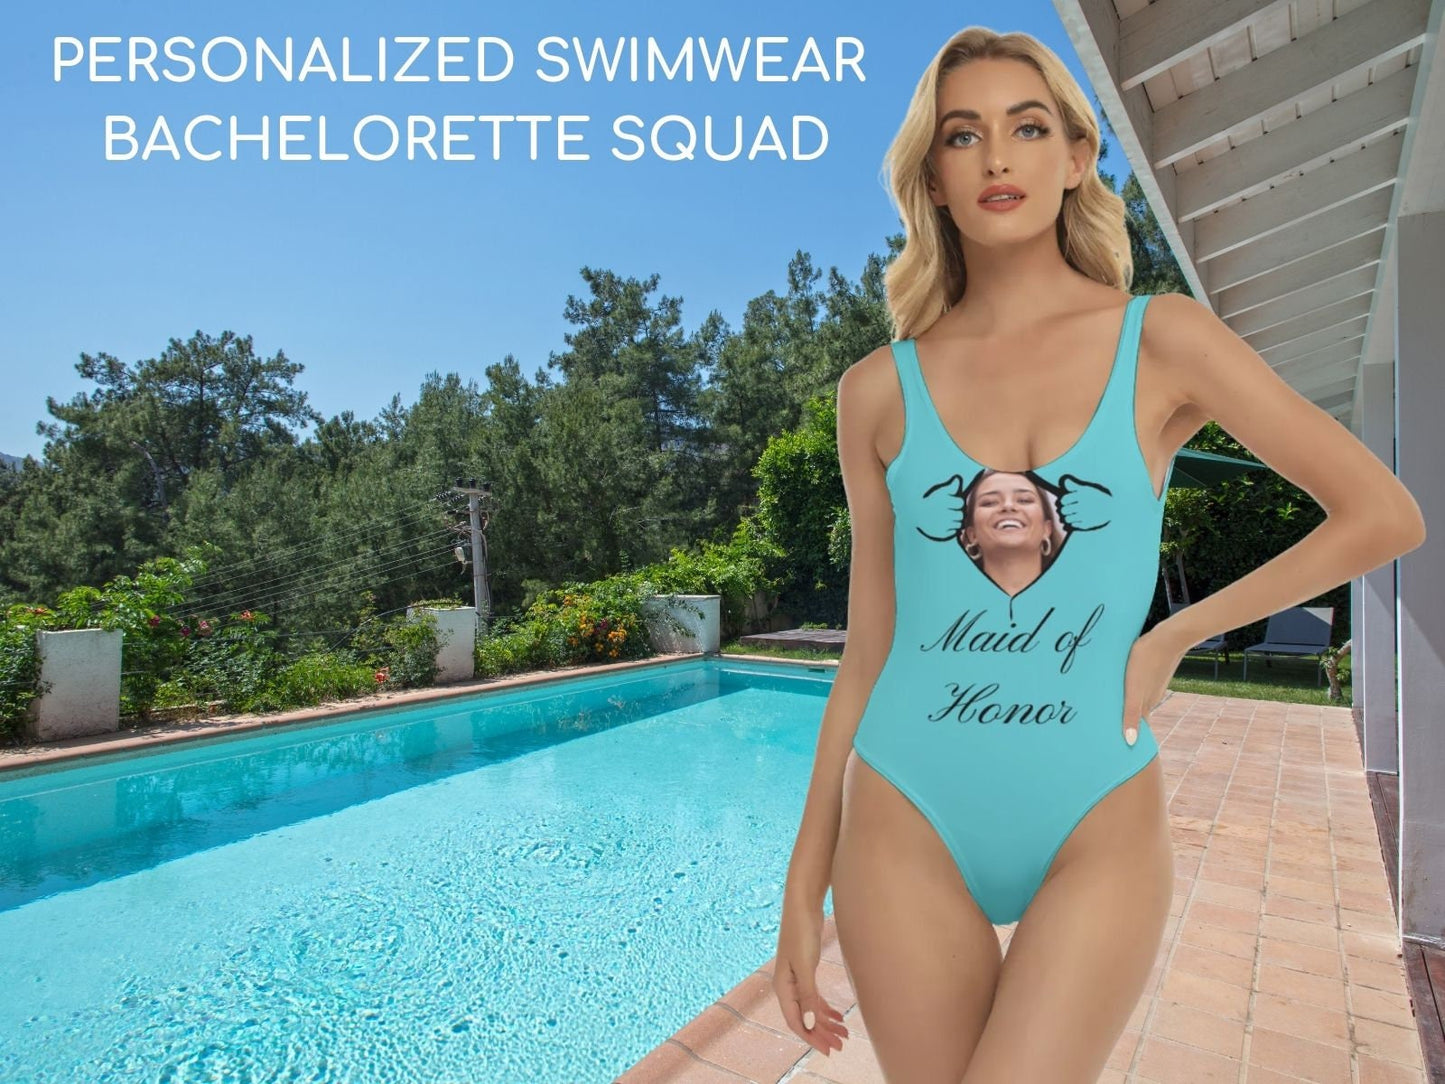 Custom Swimsuits, Custom Bachelorette Party Swimsuits w/ Super Hero Opening, Personalized Gift, Bridesmaids, Bride Squad, Beach Bachelorette